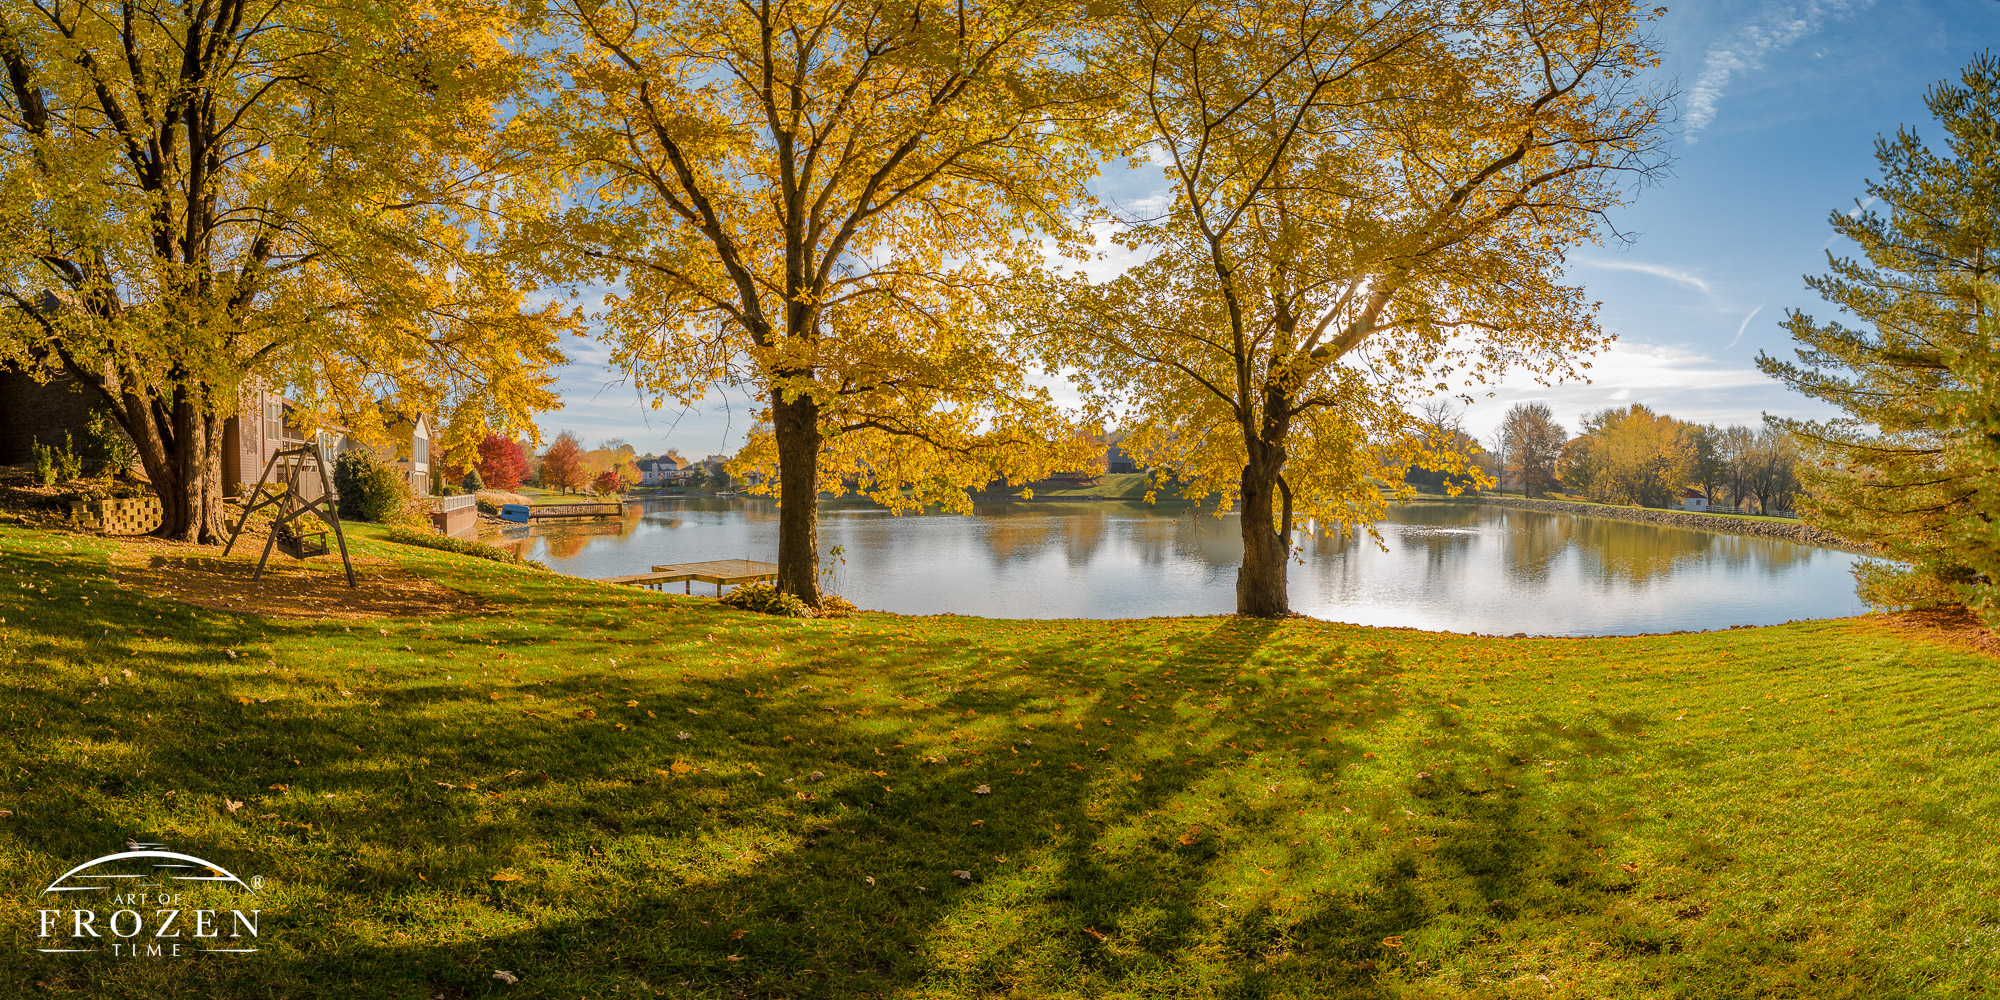 A backyard view featuring a three mature silver maple trees and a dock extending into a small pond, where the autumn sun backlit the bright yellow leaves.